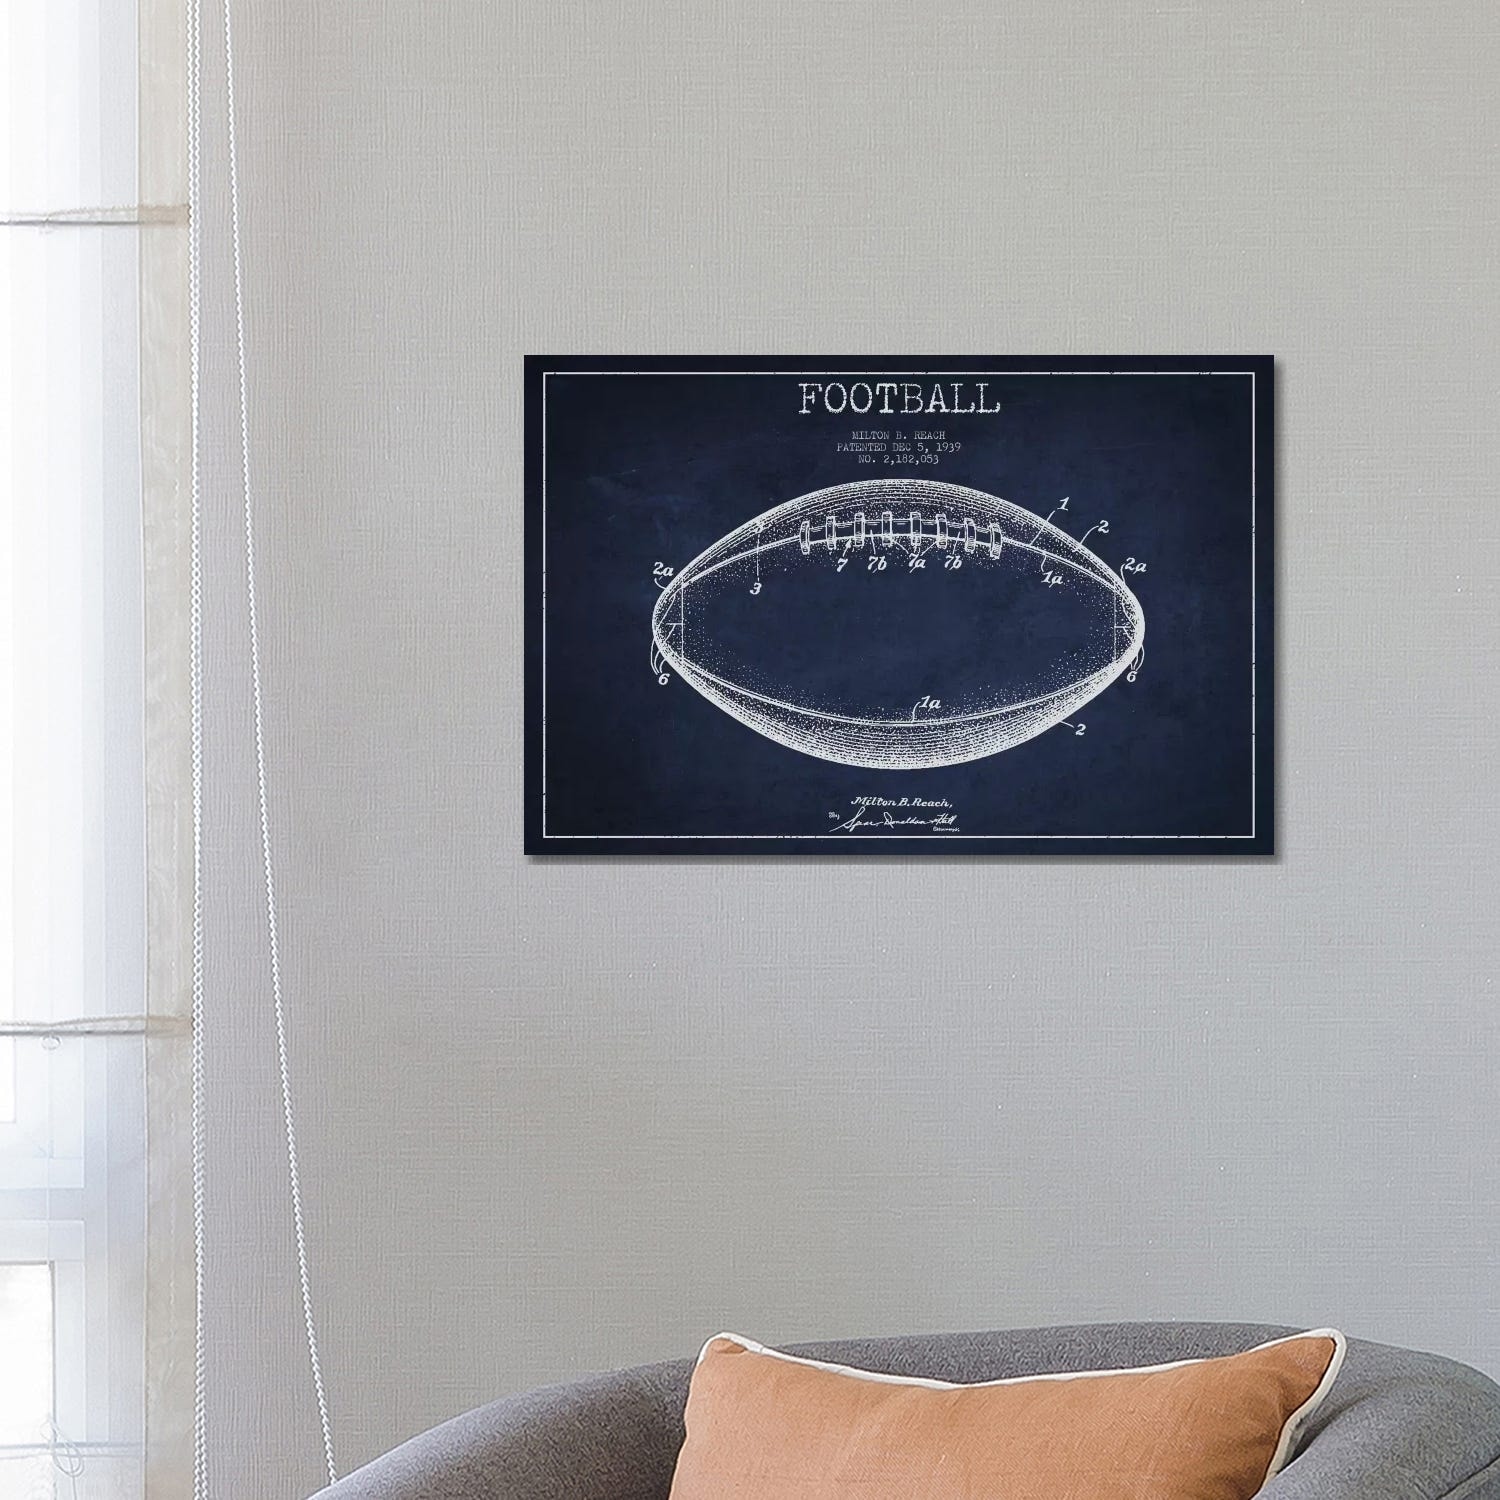 DesignOvation Sylvie Vintage Football Gear Canvas by Shawn St. Peter